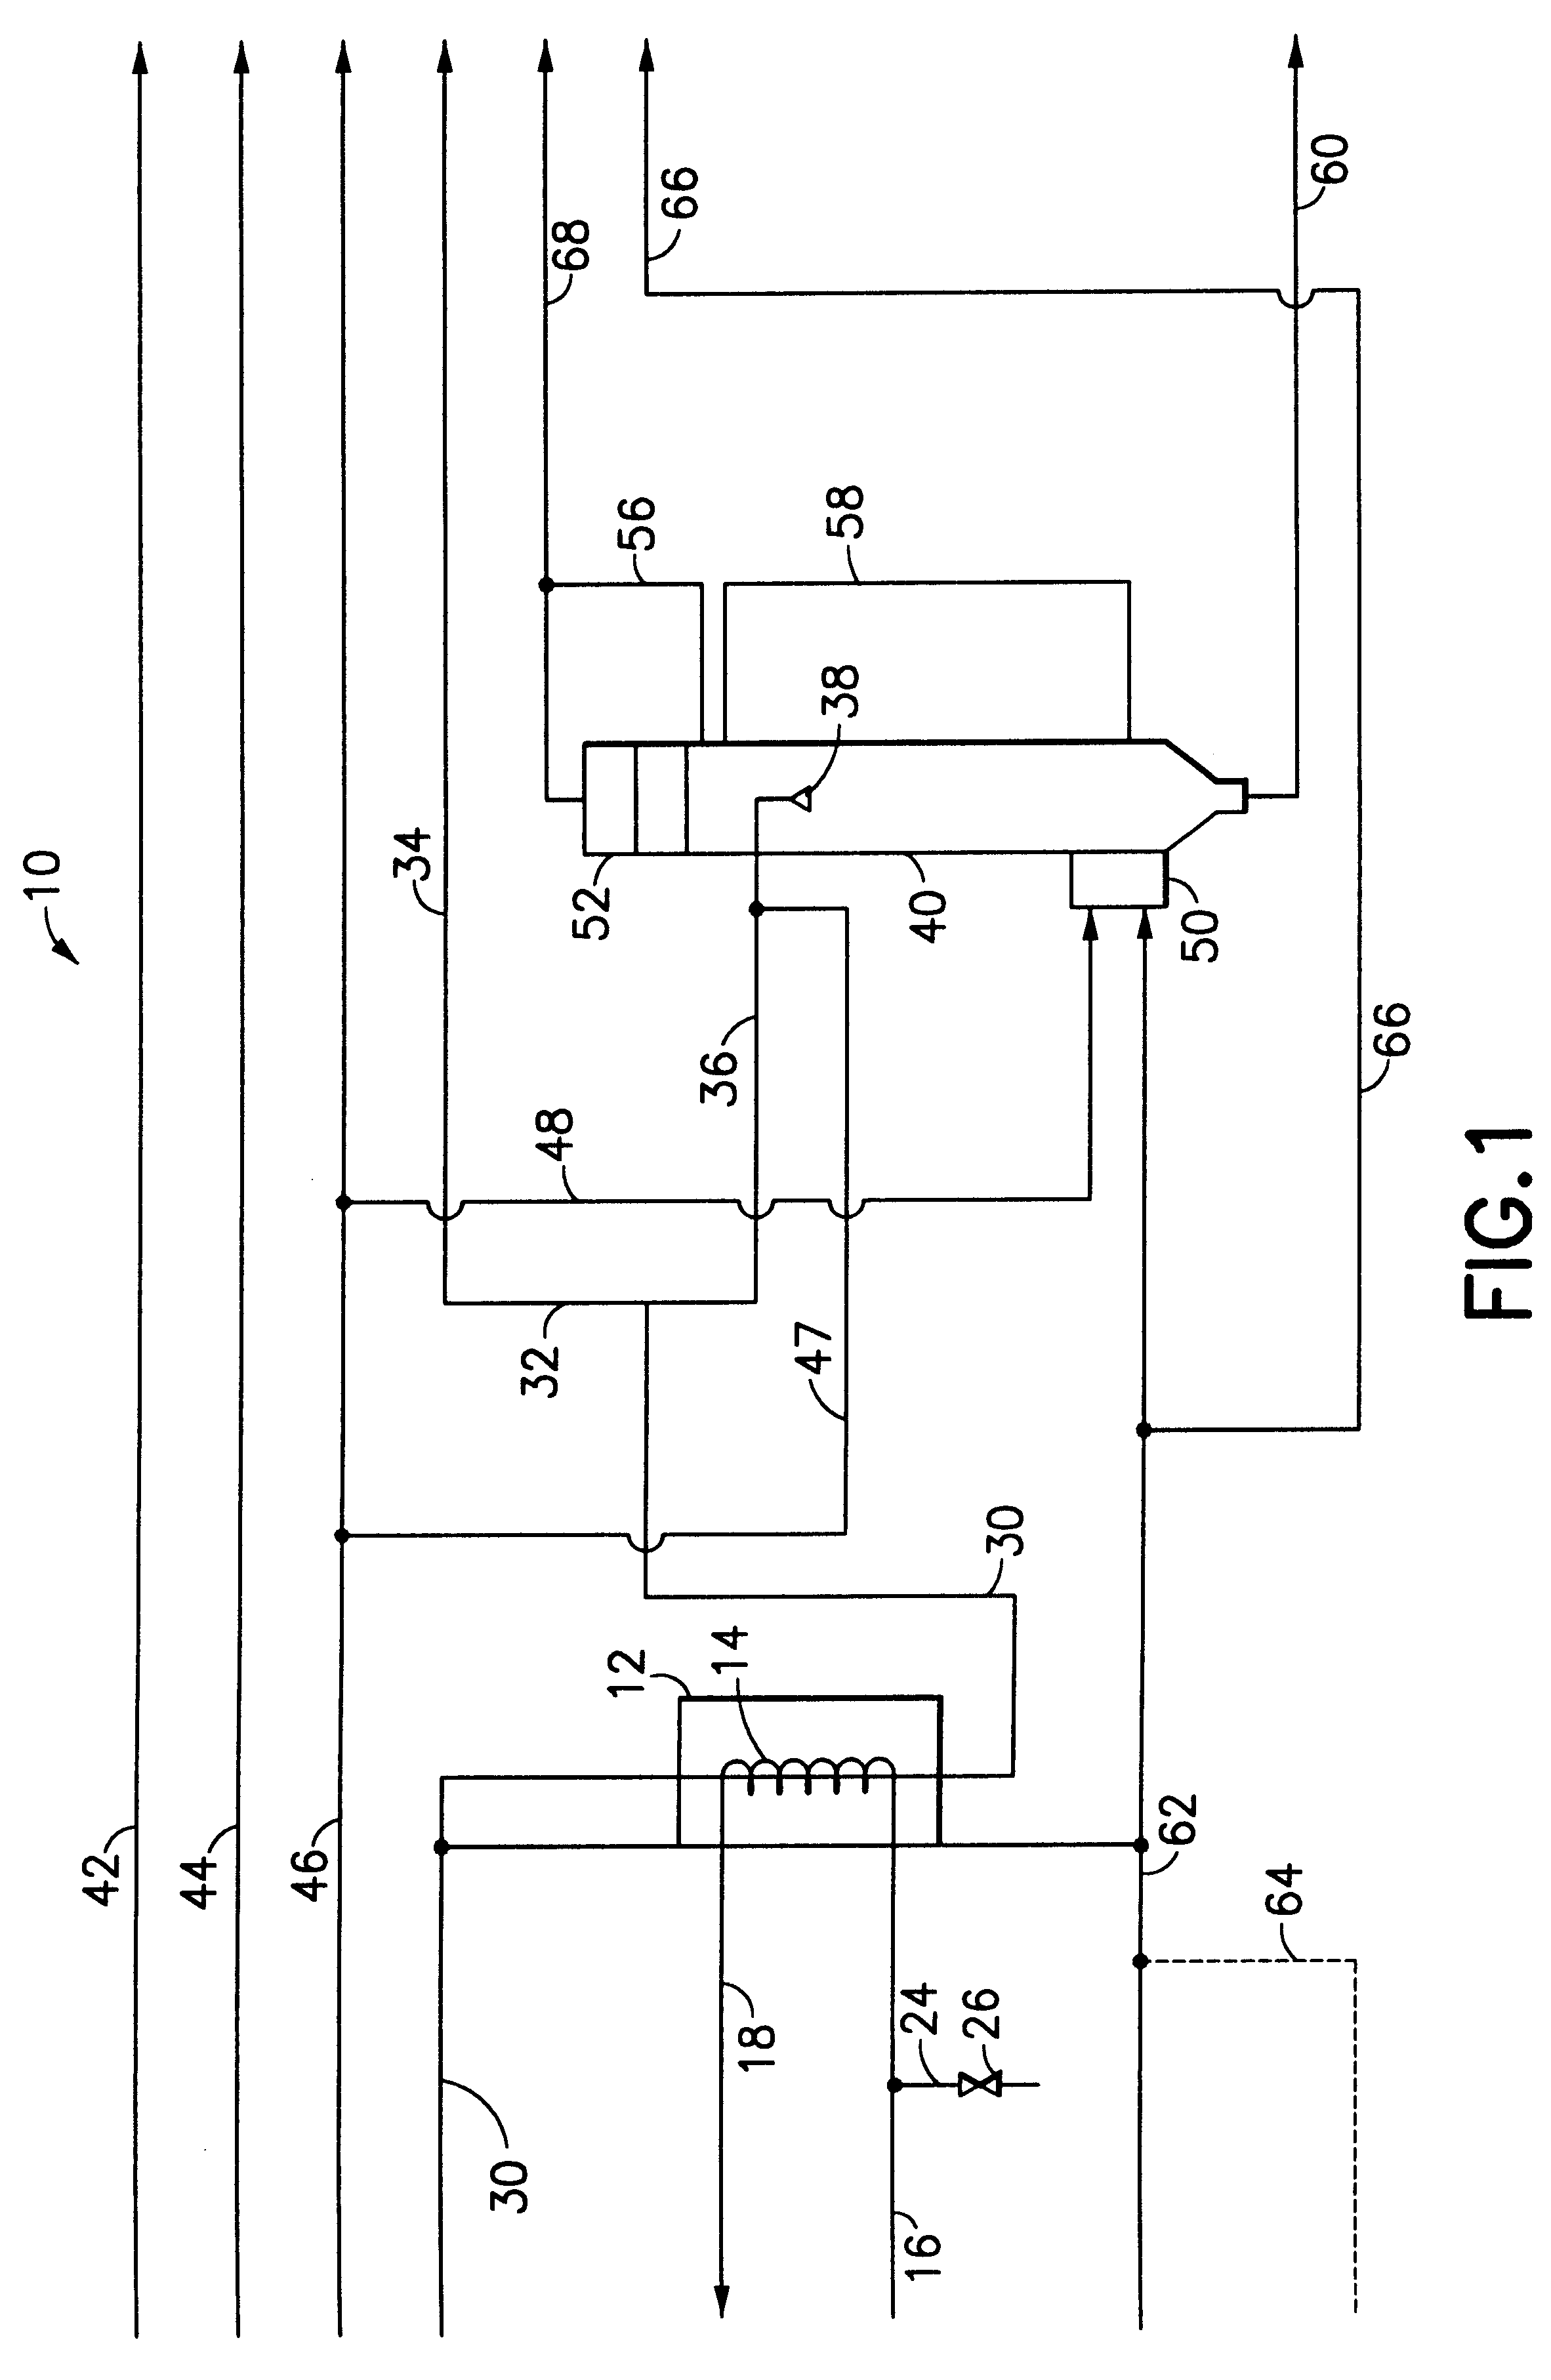 Effluent gas stream treatment system having utility for oxidation treatment of semiconductor manufacturing effluent gases